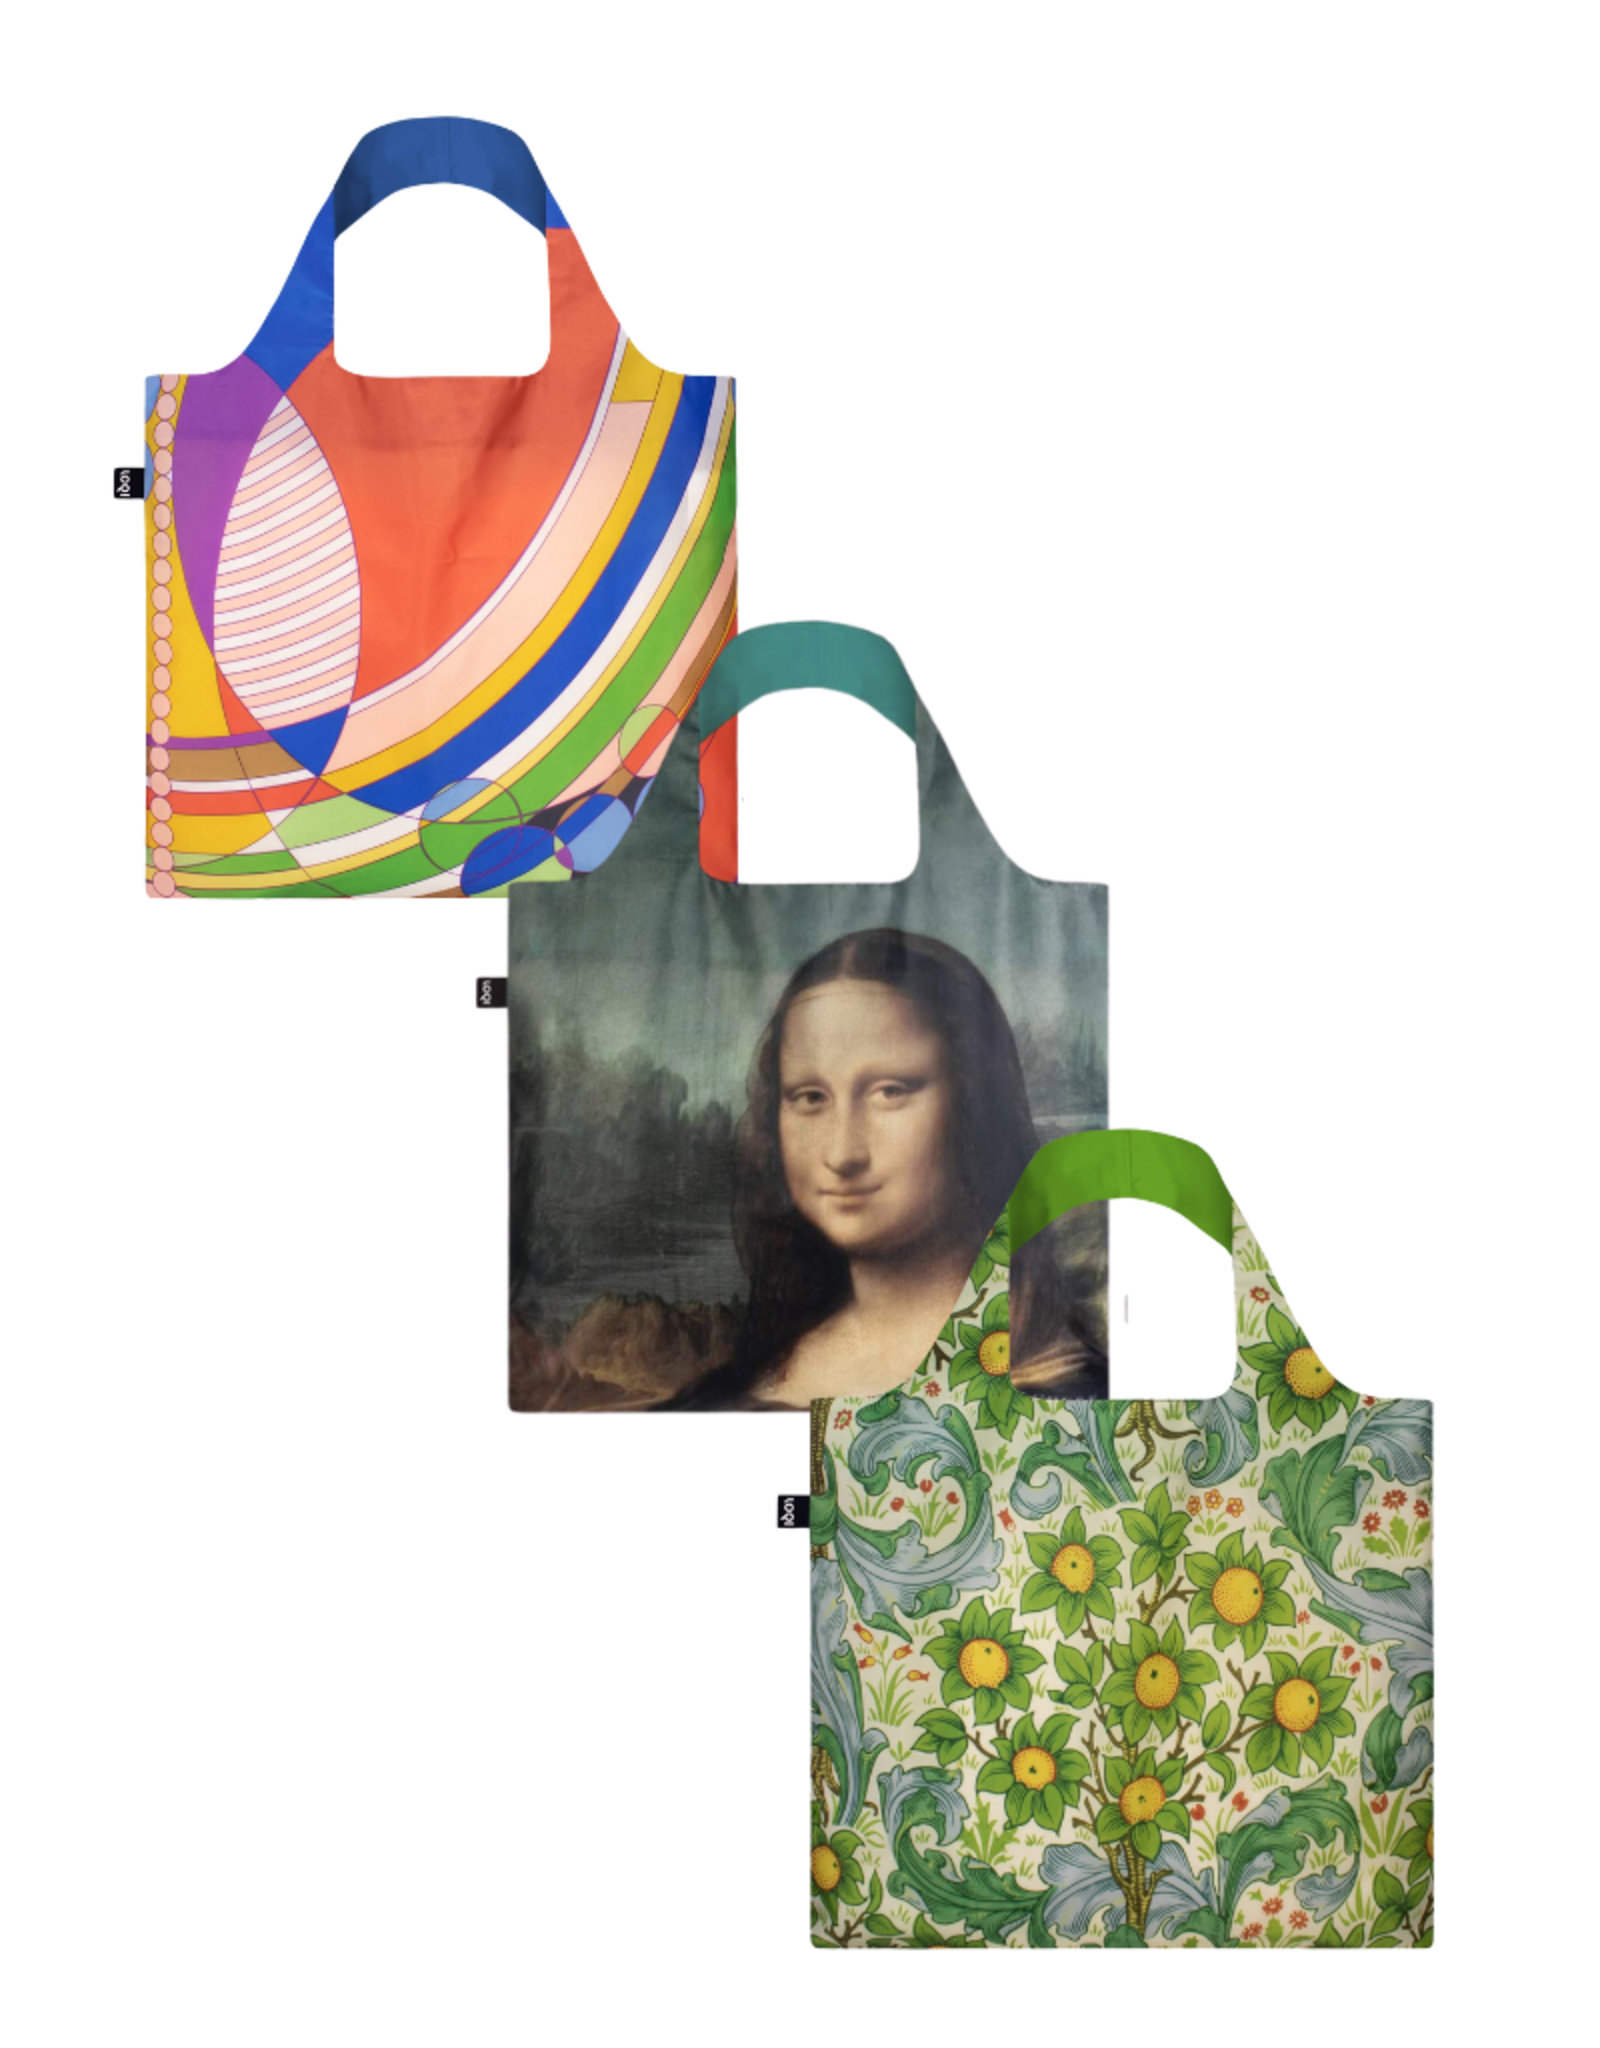 Loqi Packable Tote Bag [M-O]